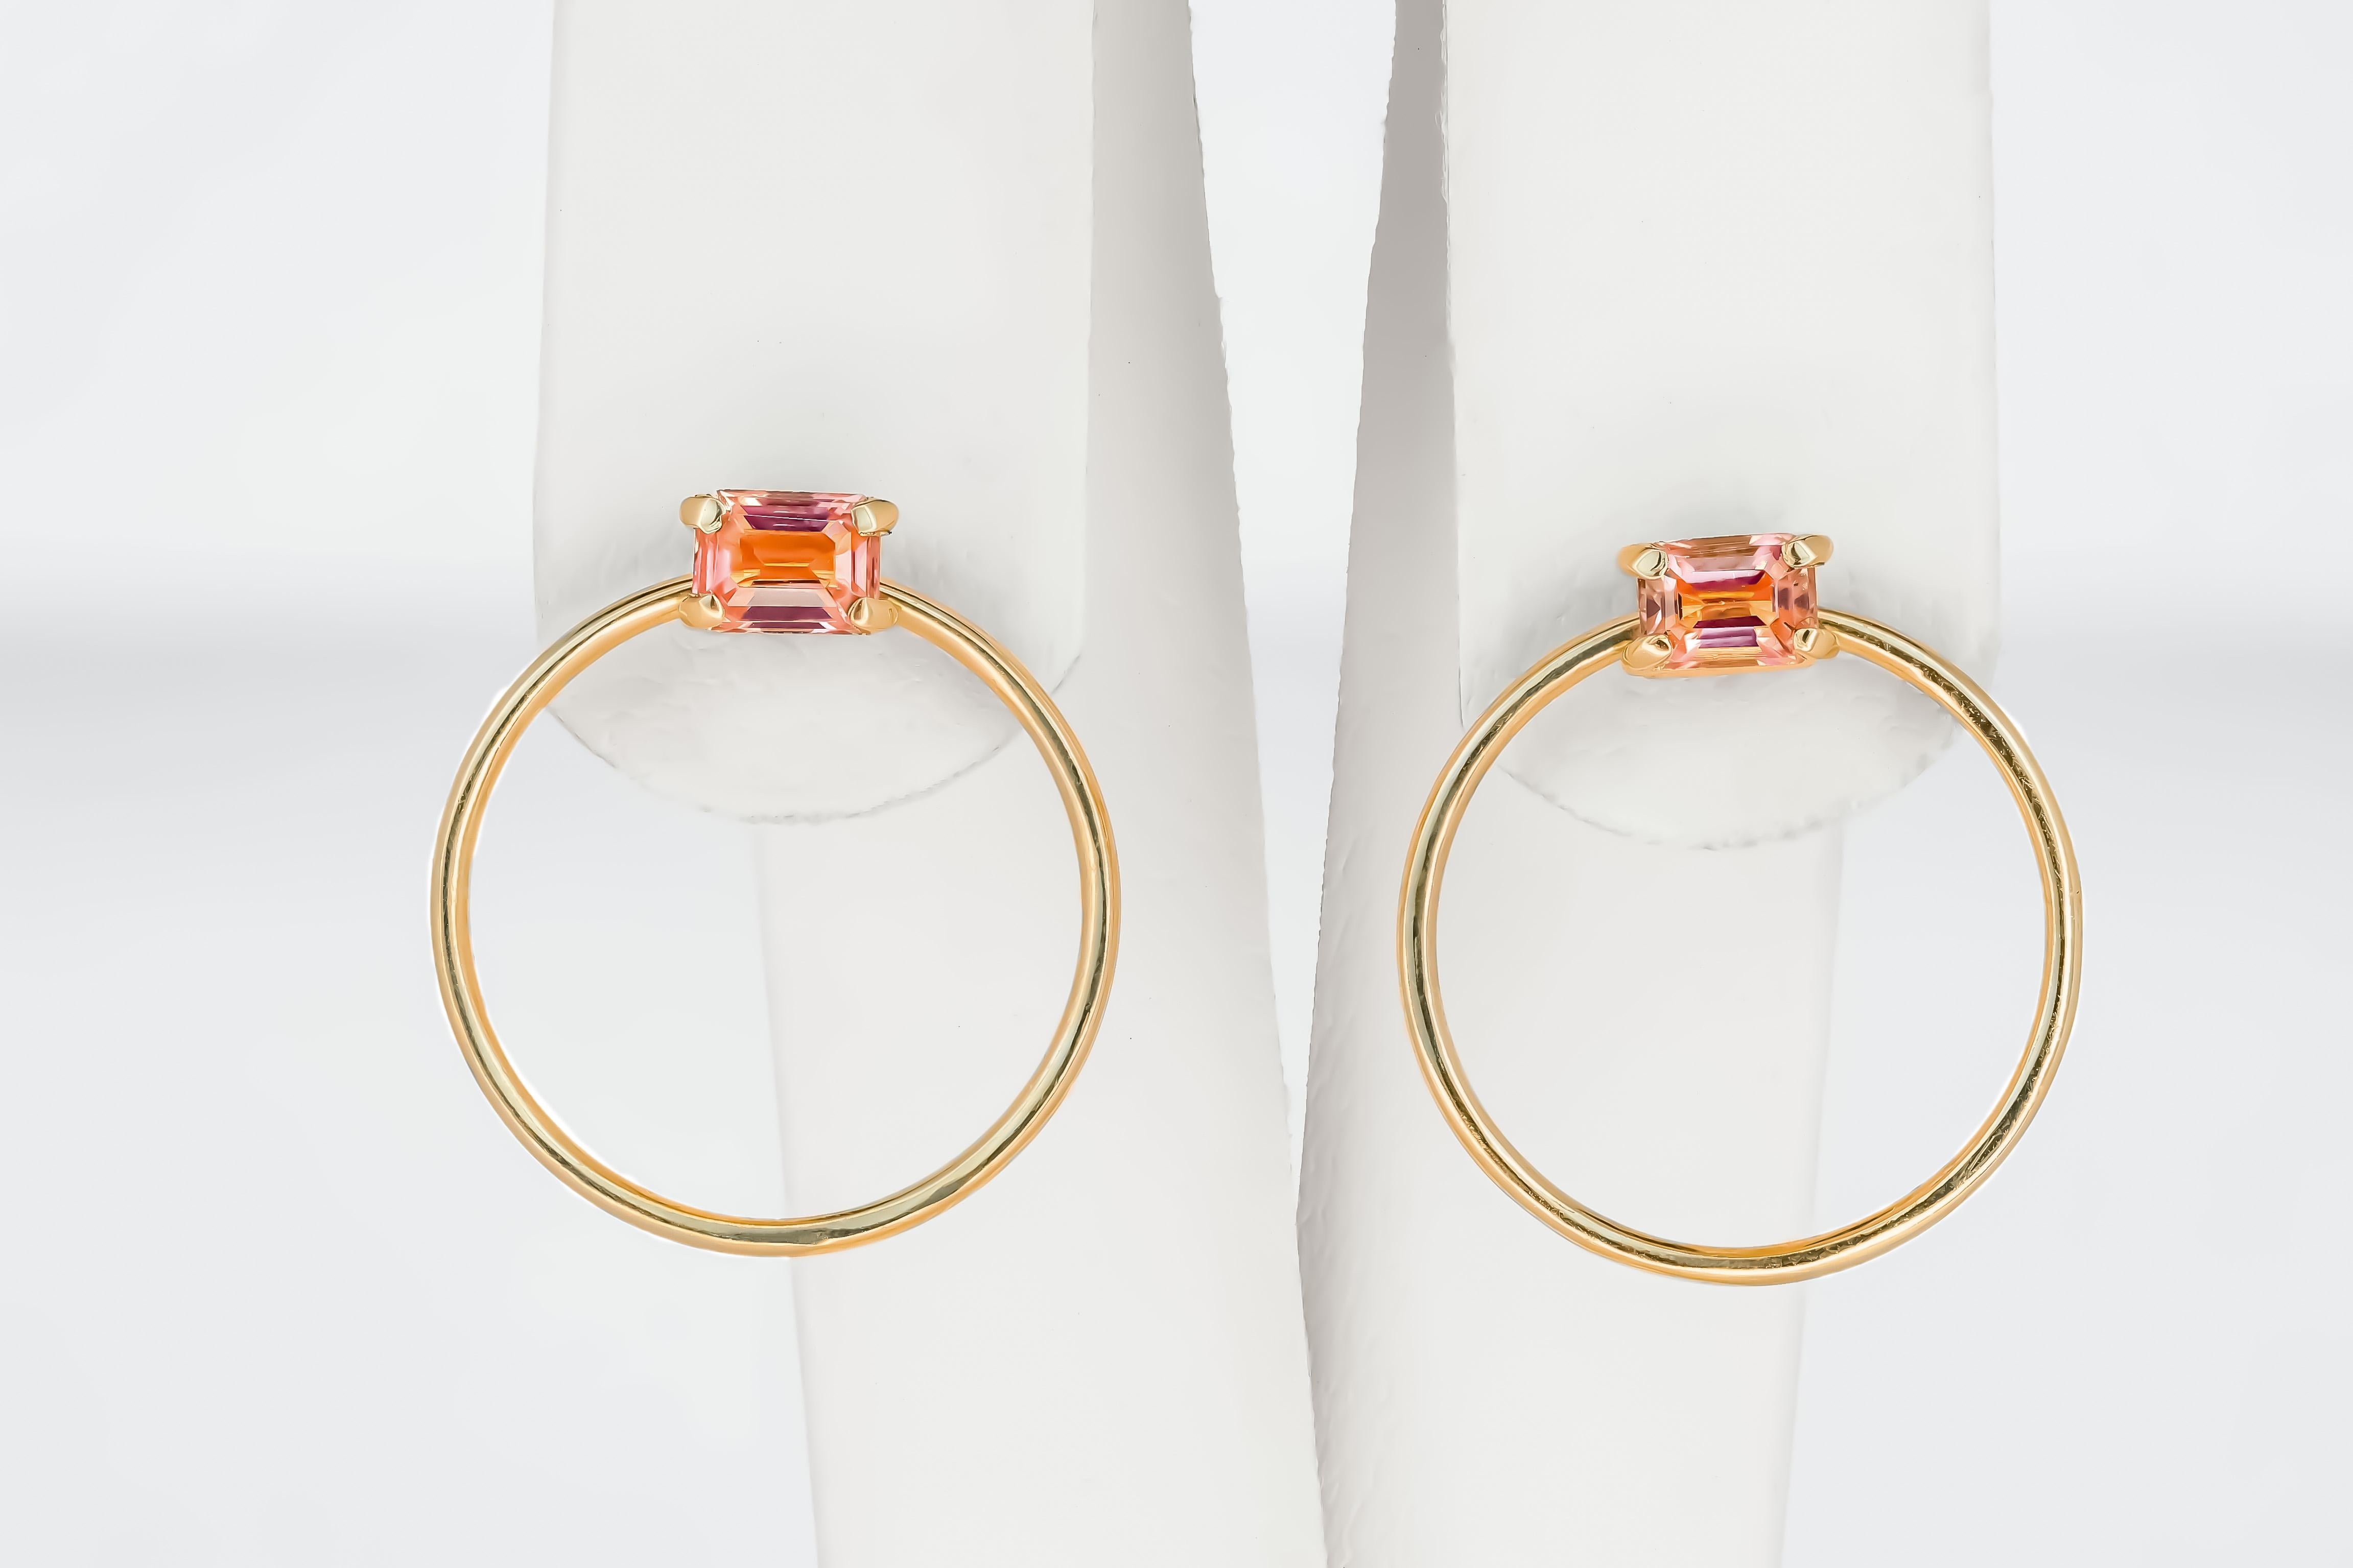 14k gold earrings studs with sapphires

metal: 14k gold , no hallmark tested in lab
weight: 2.1 gr
size: 16.5x16.5mm
set with sapphires: peach-pink color, baguette cut, clarity good - small inclusions, 0.20x2=0.40 ct total
 Earrings goes with a